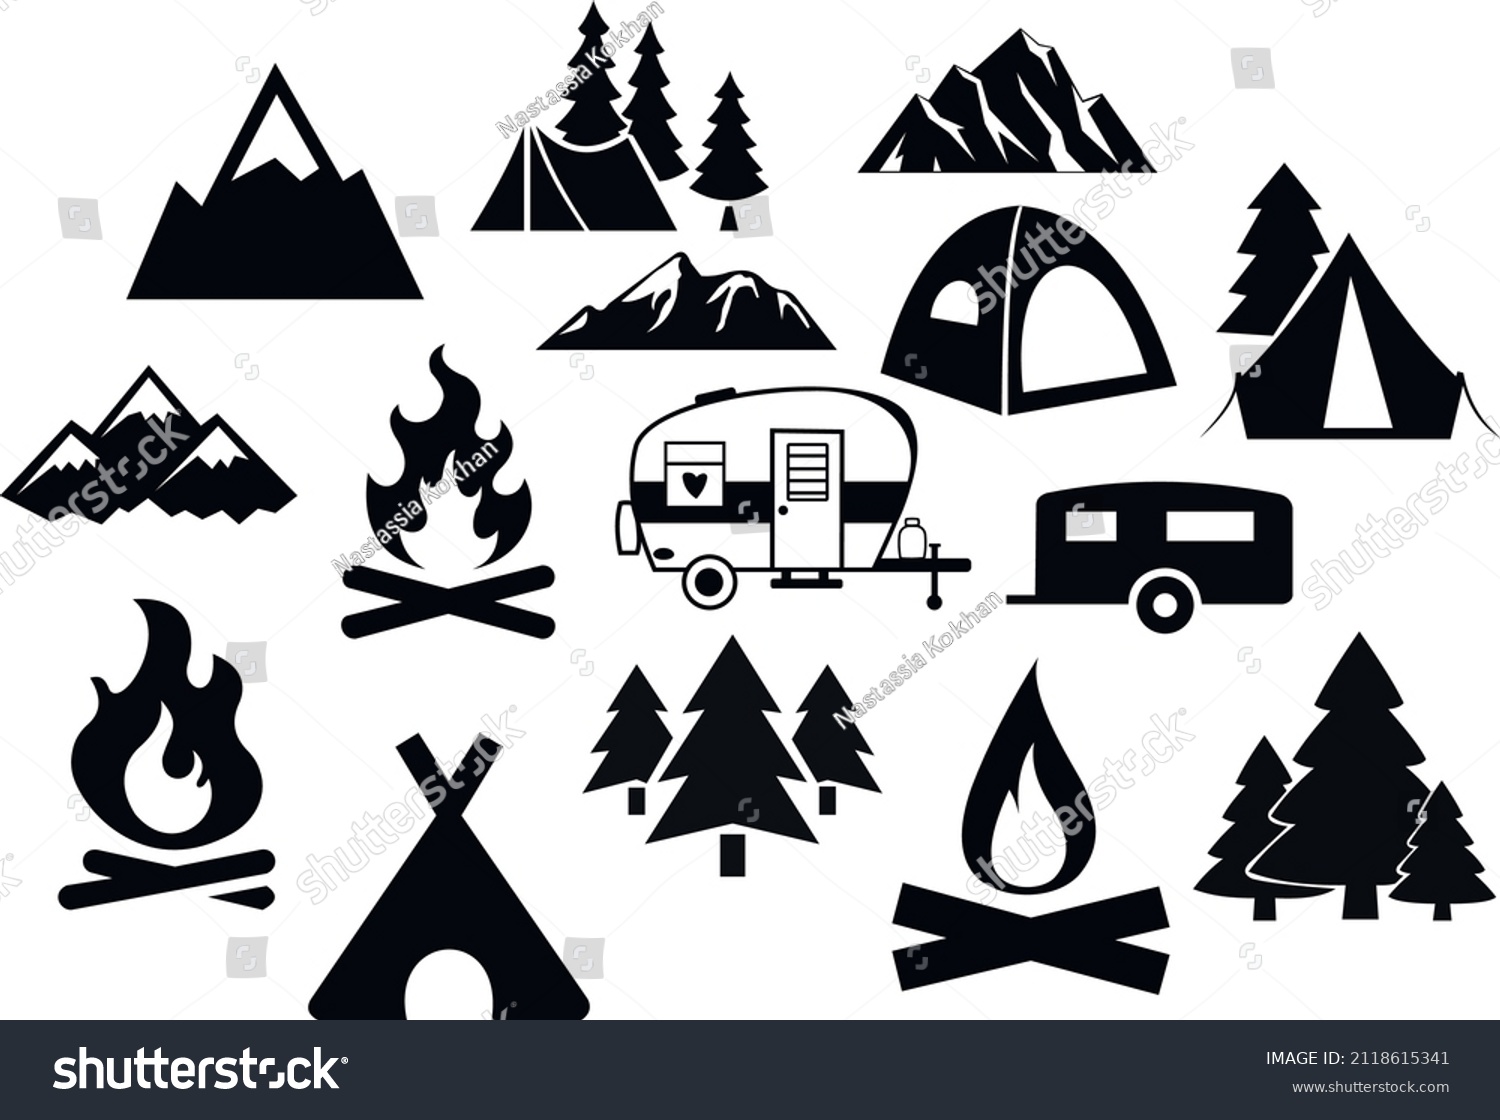 SVG of camping bundle svg vector Illustration isolated on white background. camping and chill, active recreation,leisure,travel,rest near the fire with friends,campaign with family,print for T-shirt svg